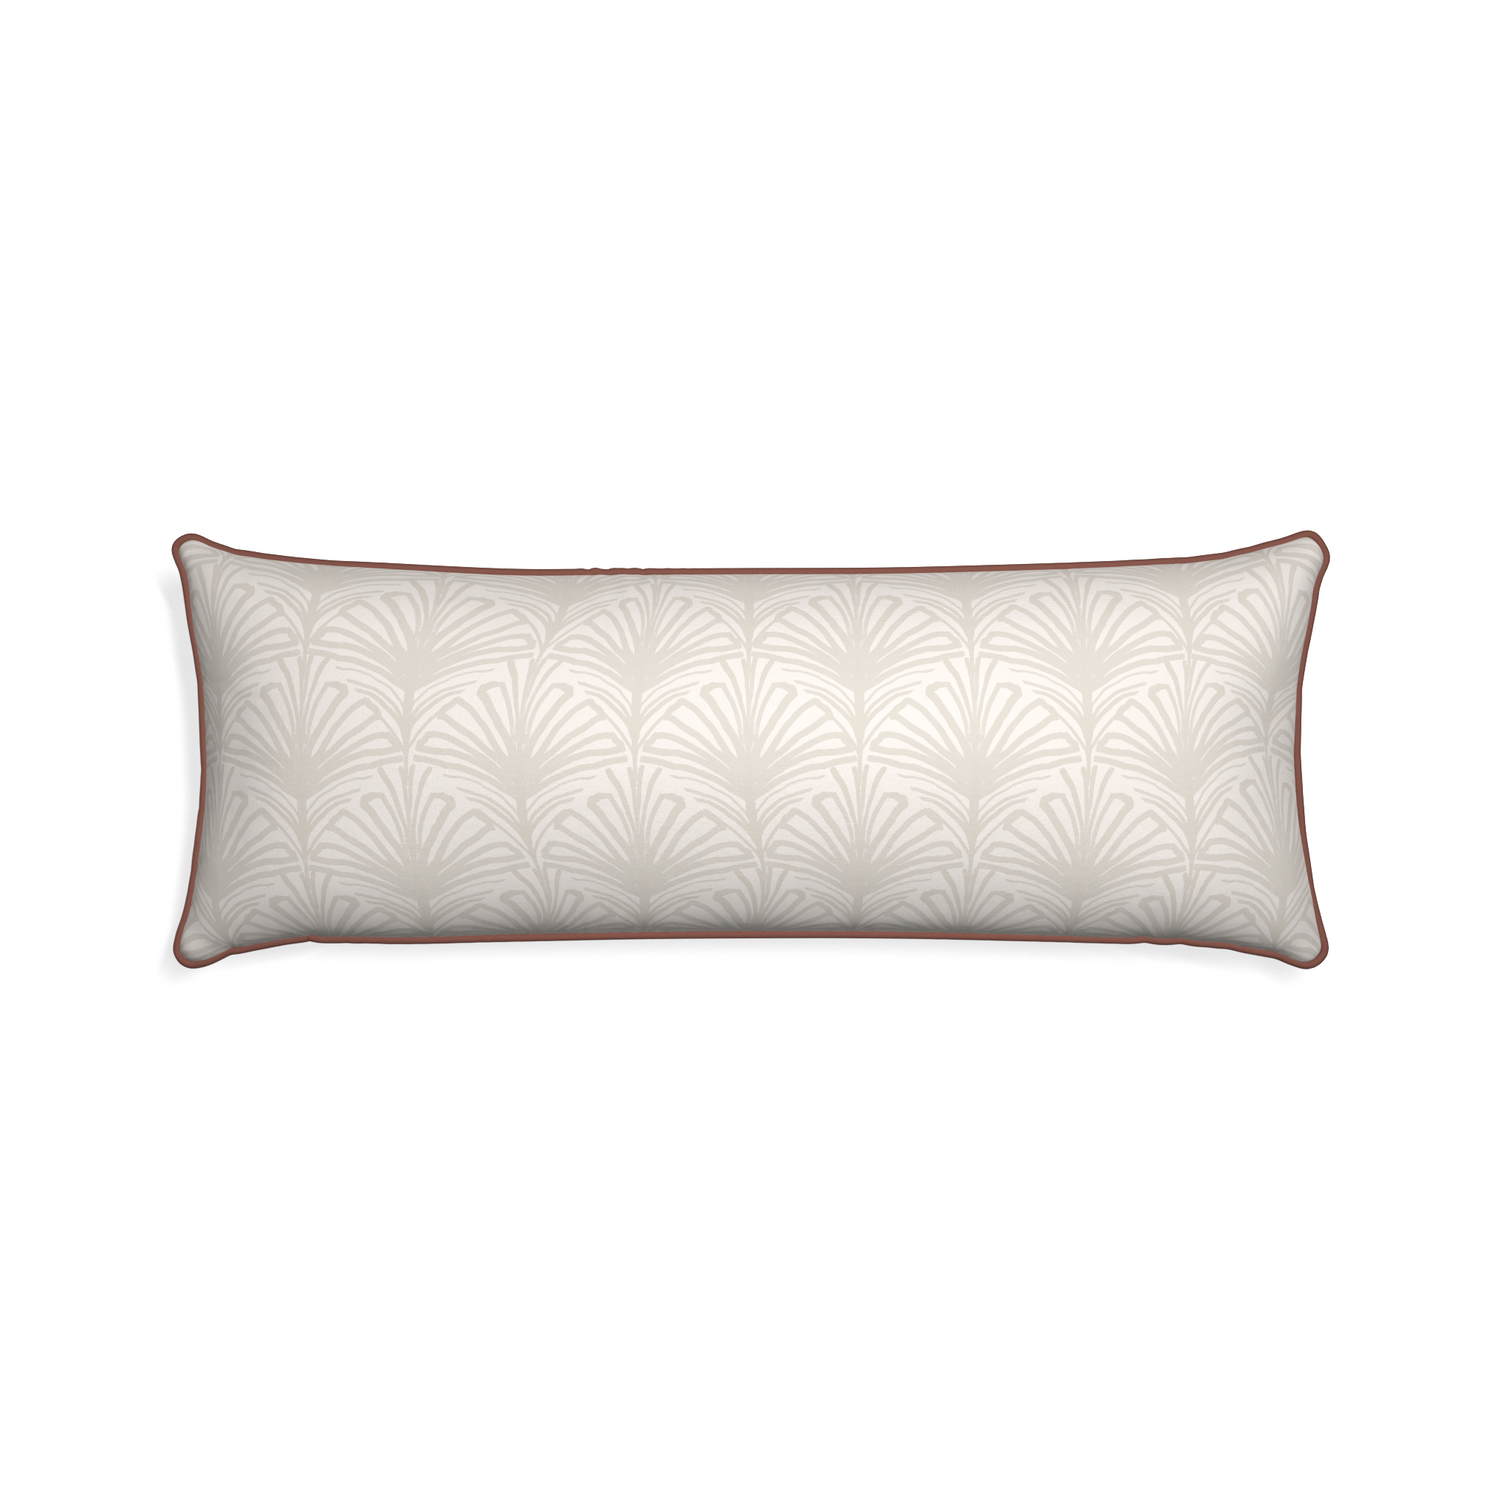 Xl-lumbar suzy sand custom pillow with w piping on white background